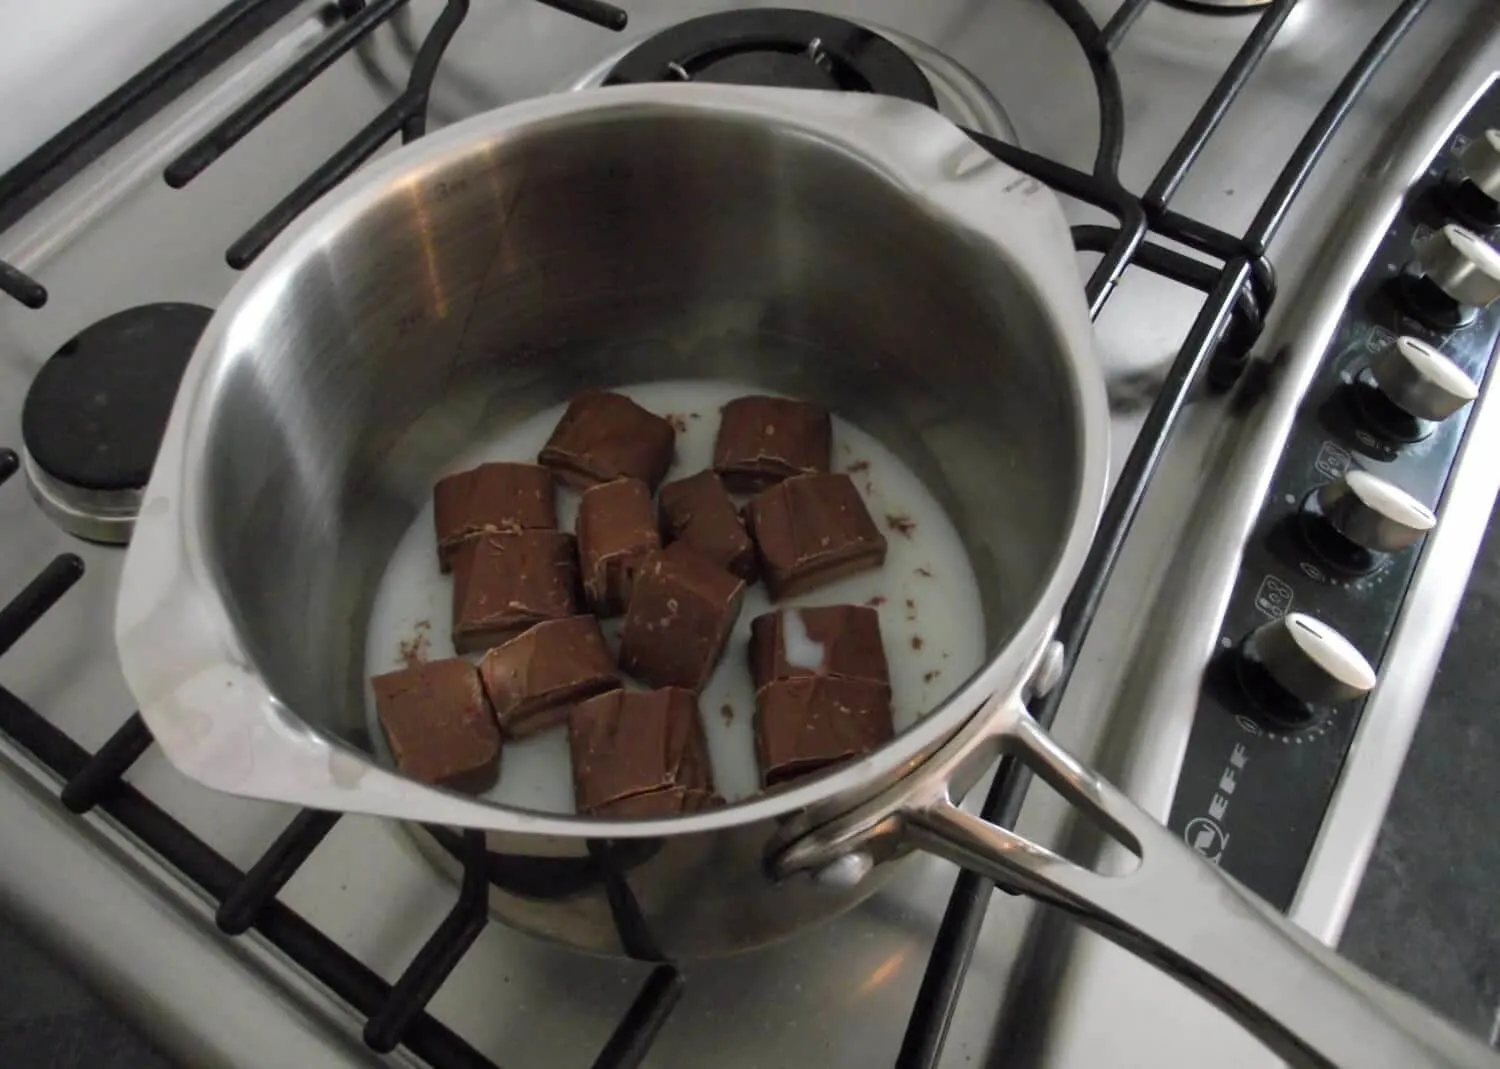 Mars Bars and milk in a saucepan on the hob